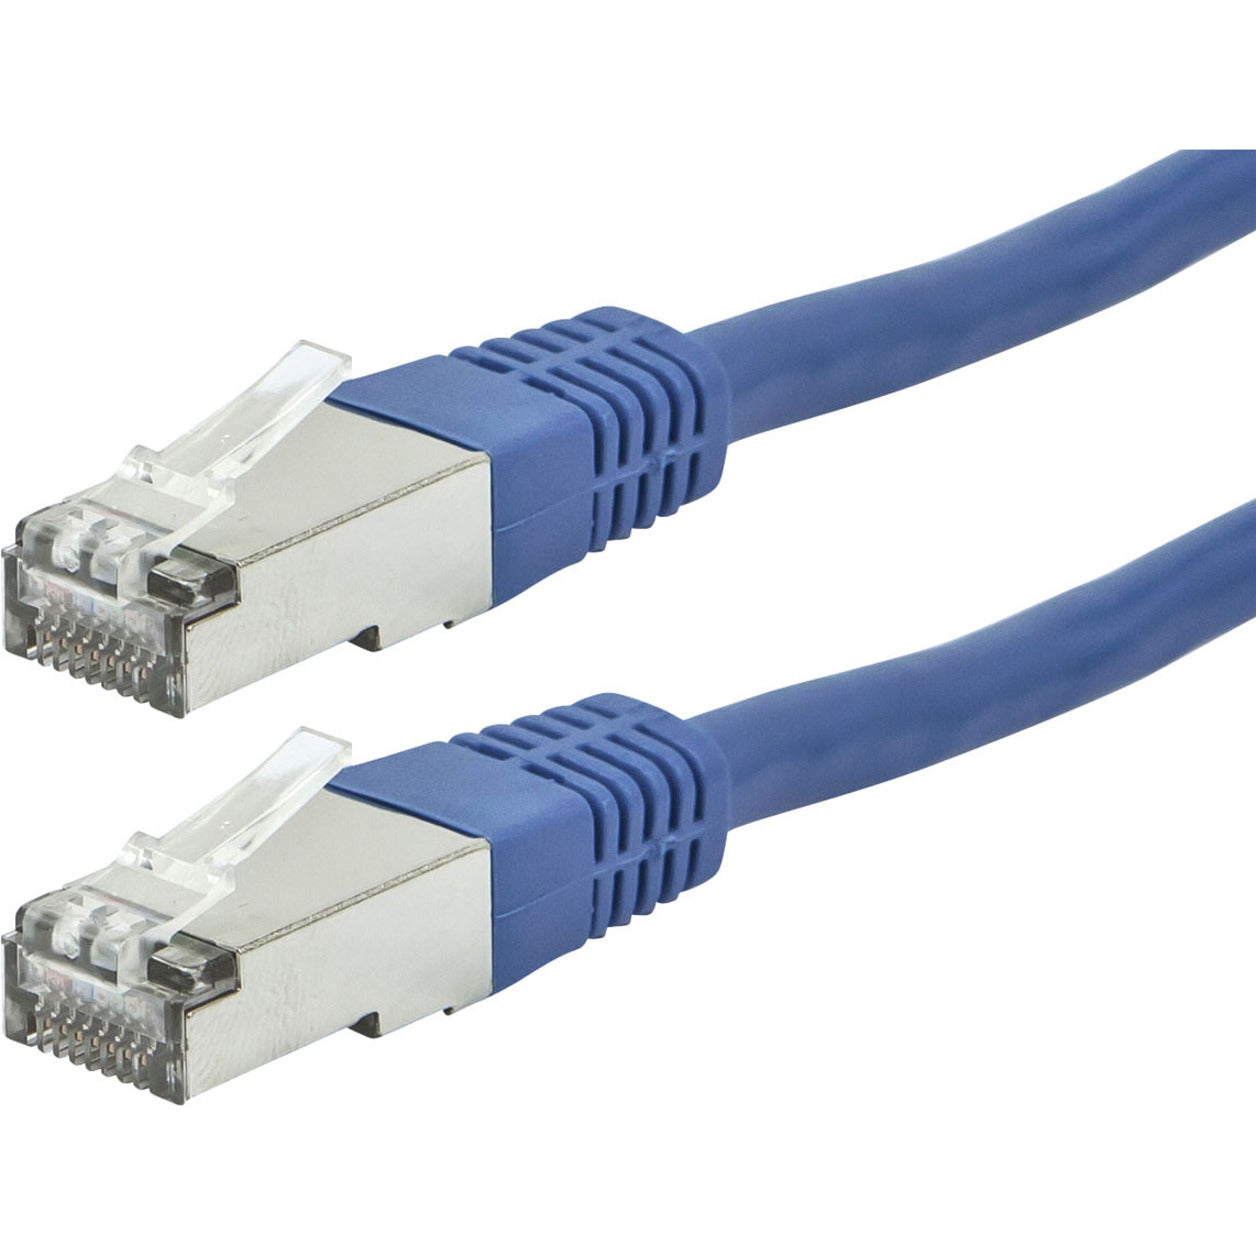 Monoprice 11234 Entegrade Cat.6a STP Network Cable, 100 ft, Stranded, Shielded, Blue